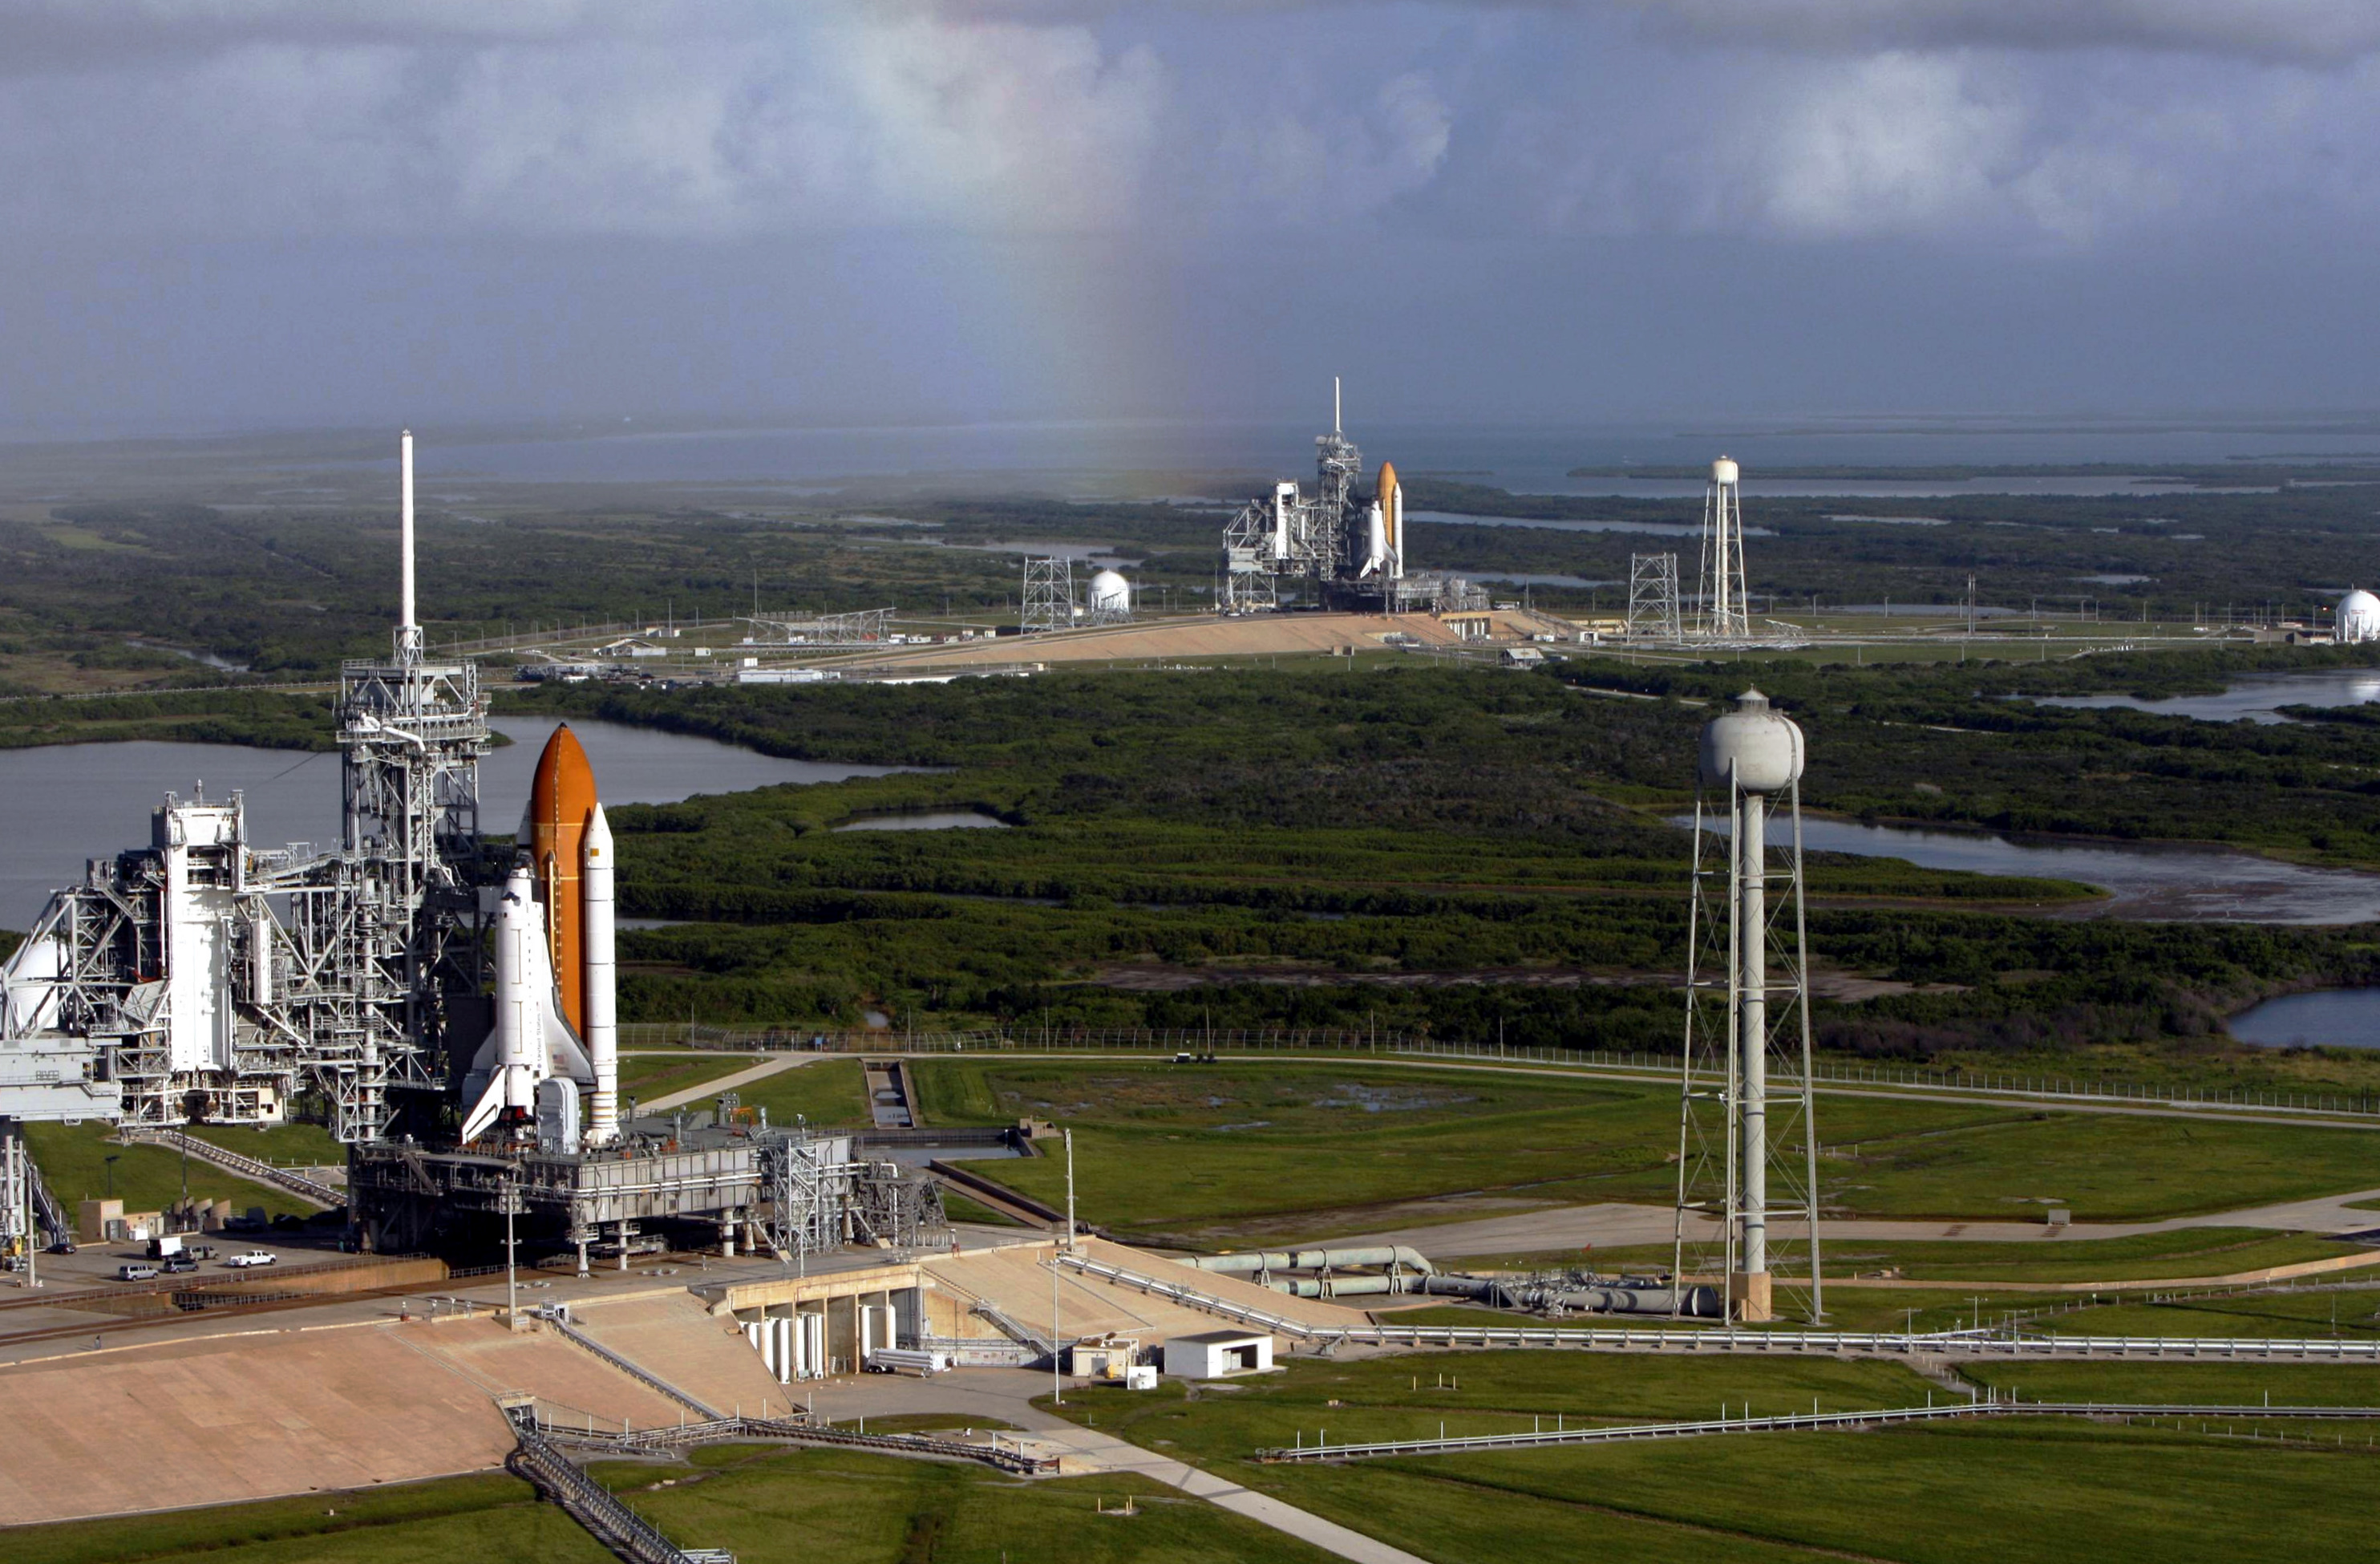 Space_shuttles_Atlantis_(STS-125)_and_Endeavour_(STS-400)_on_launch_pads.jpg